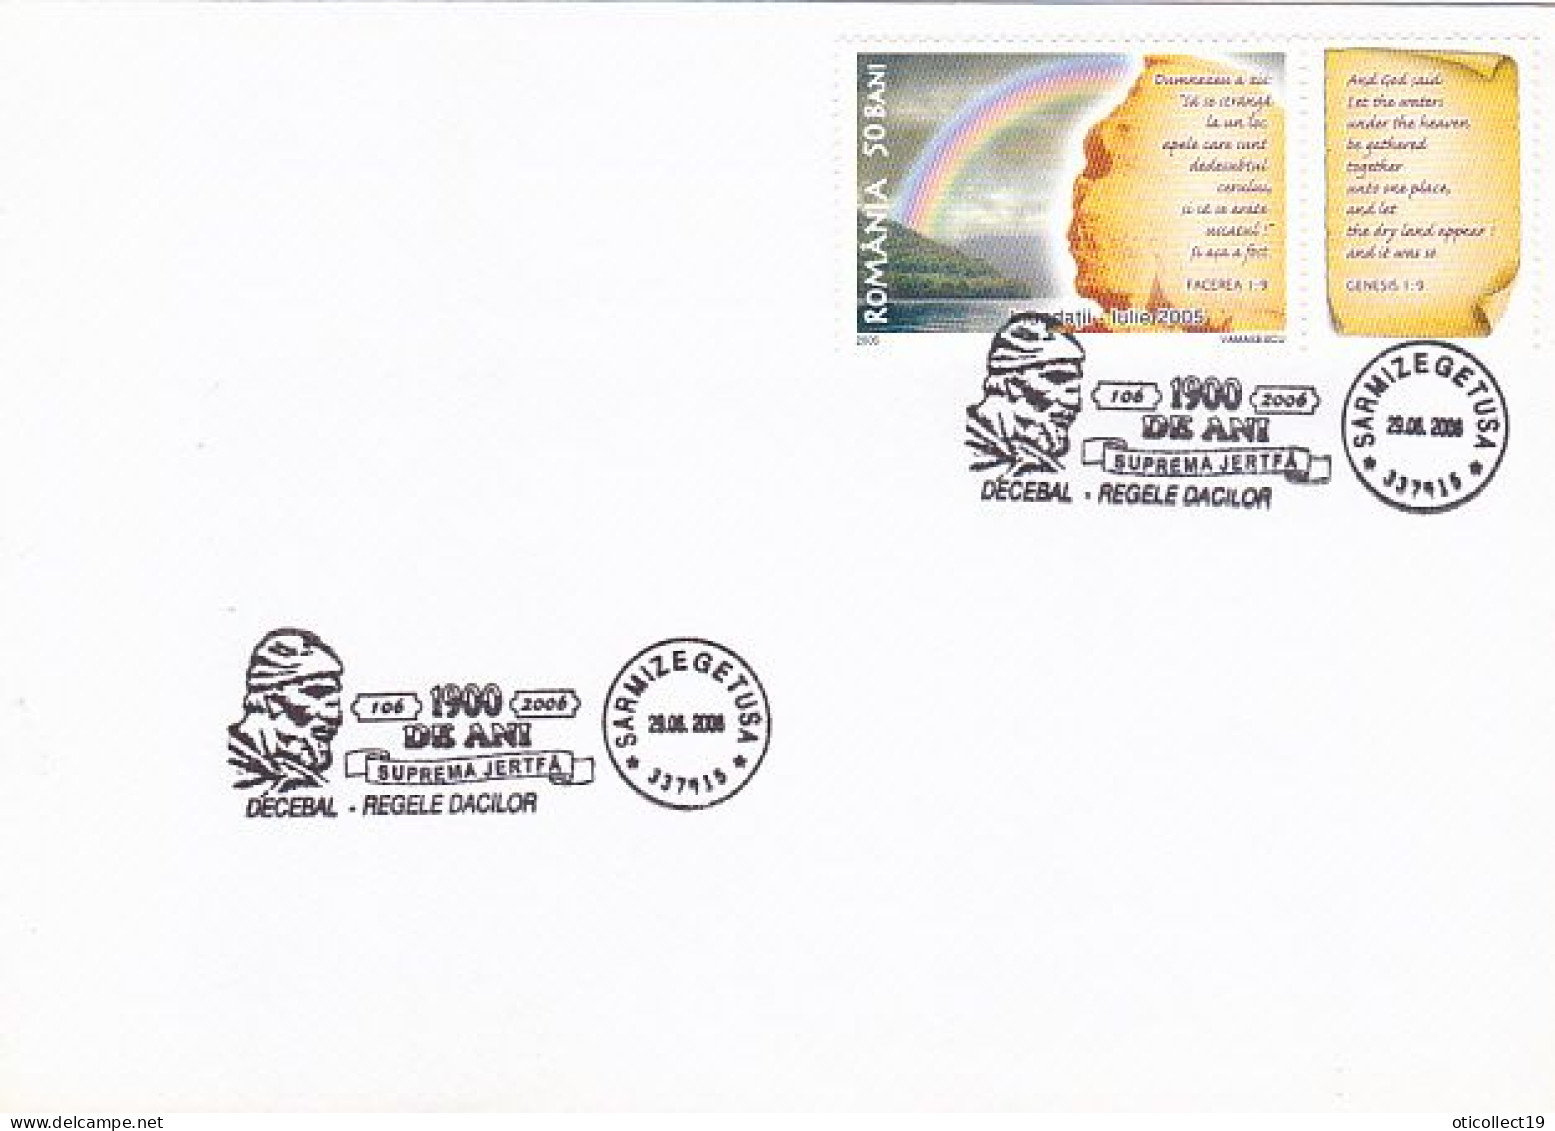 KING DECEBALUS OF DACIA SPECIAL POSTMARKS, 2005 FLOODS RELIEF STAMP ON COVER, 2006, ROMANIA - Storia Postale